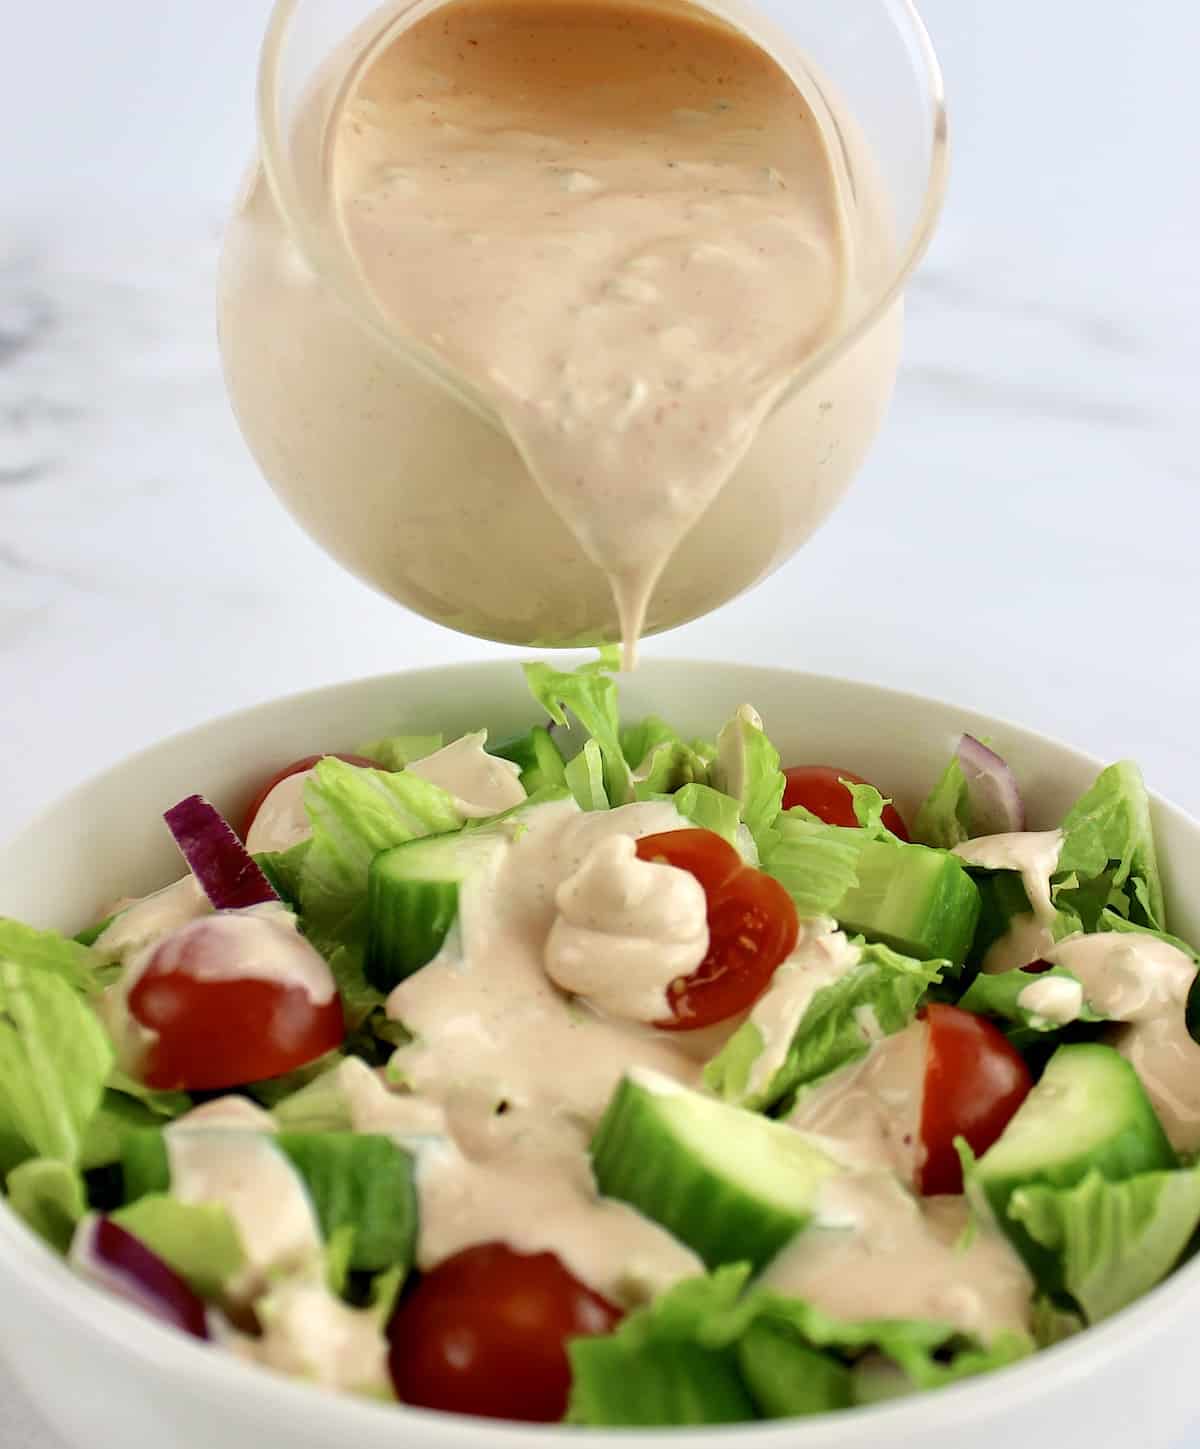 Thousand Island Dressing being poured over salad